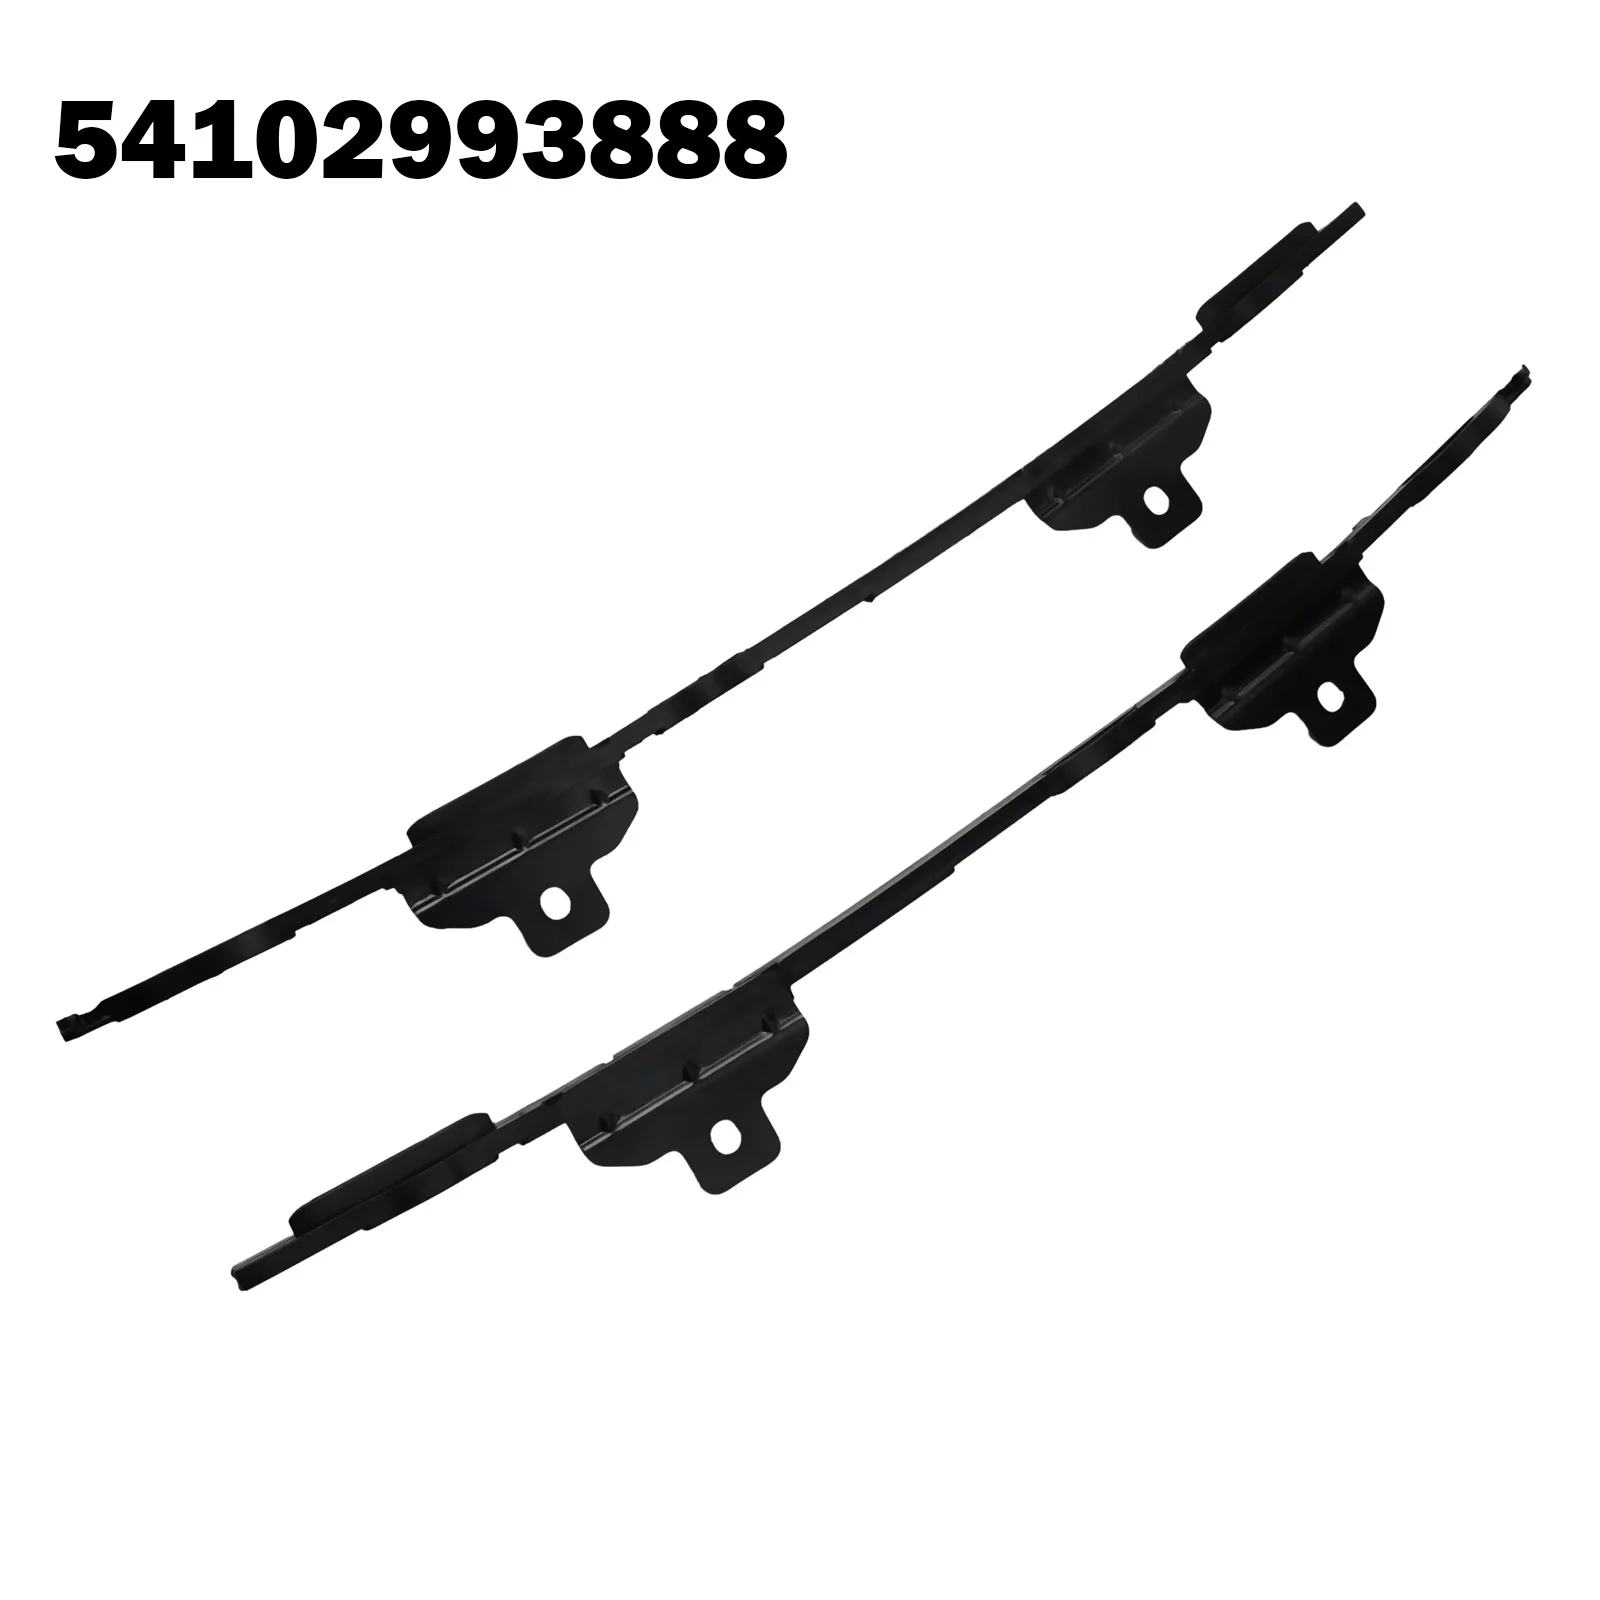 

2013-2015 For Bmw High Quality Plastic Plug-and-play 54102993888 Black Brand New 2pcs For BMW X1 E84 2009-2014